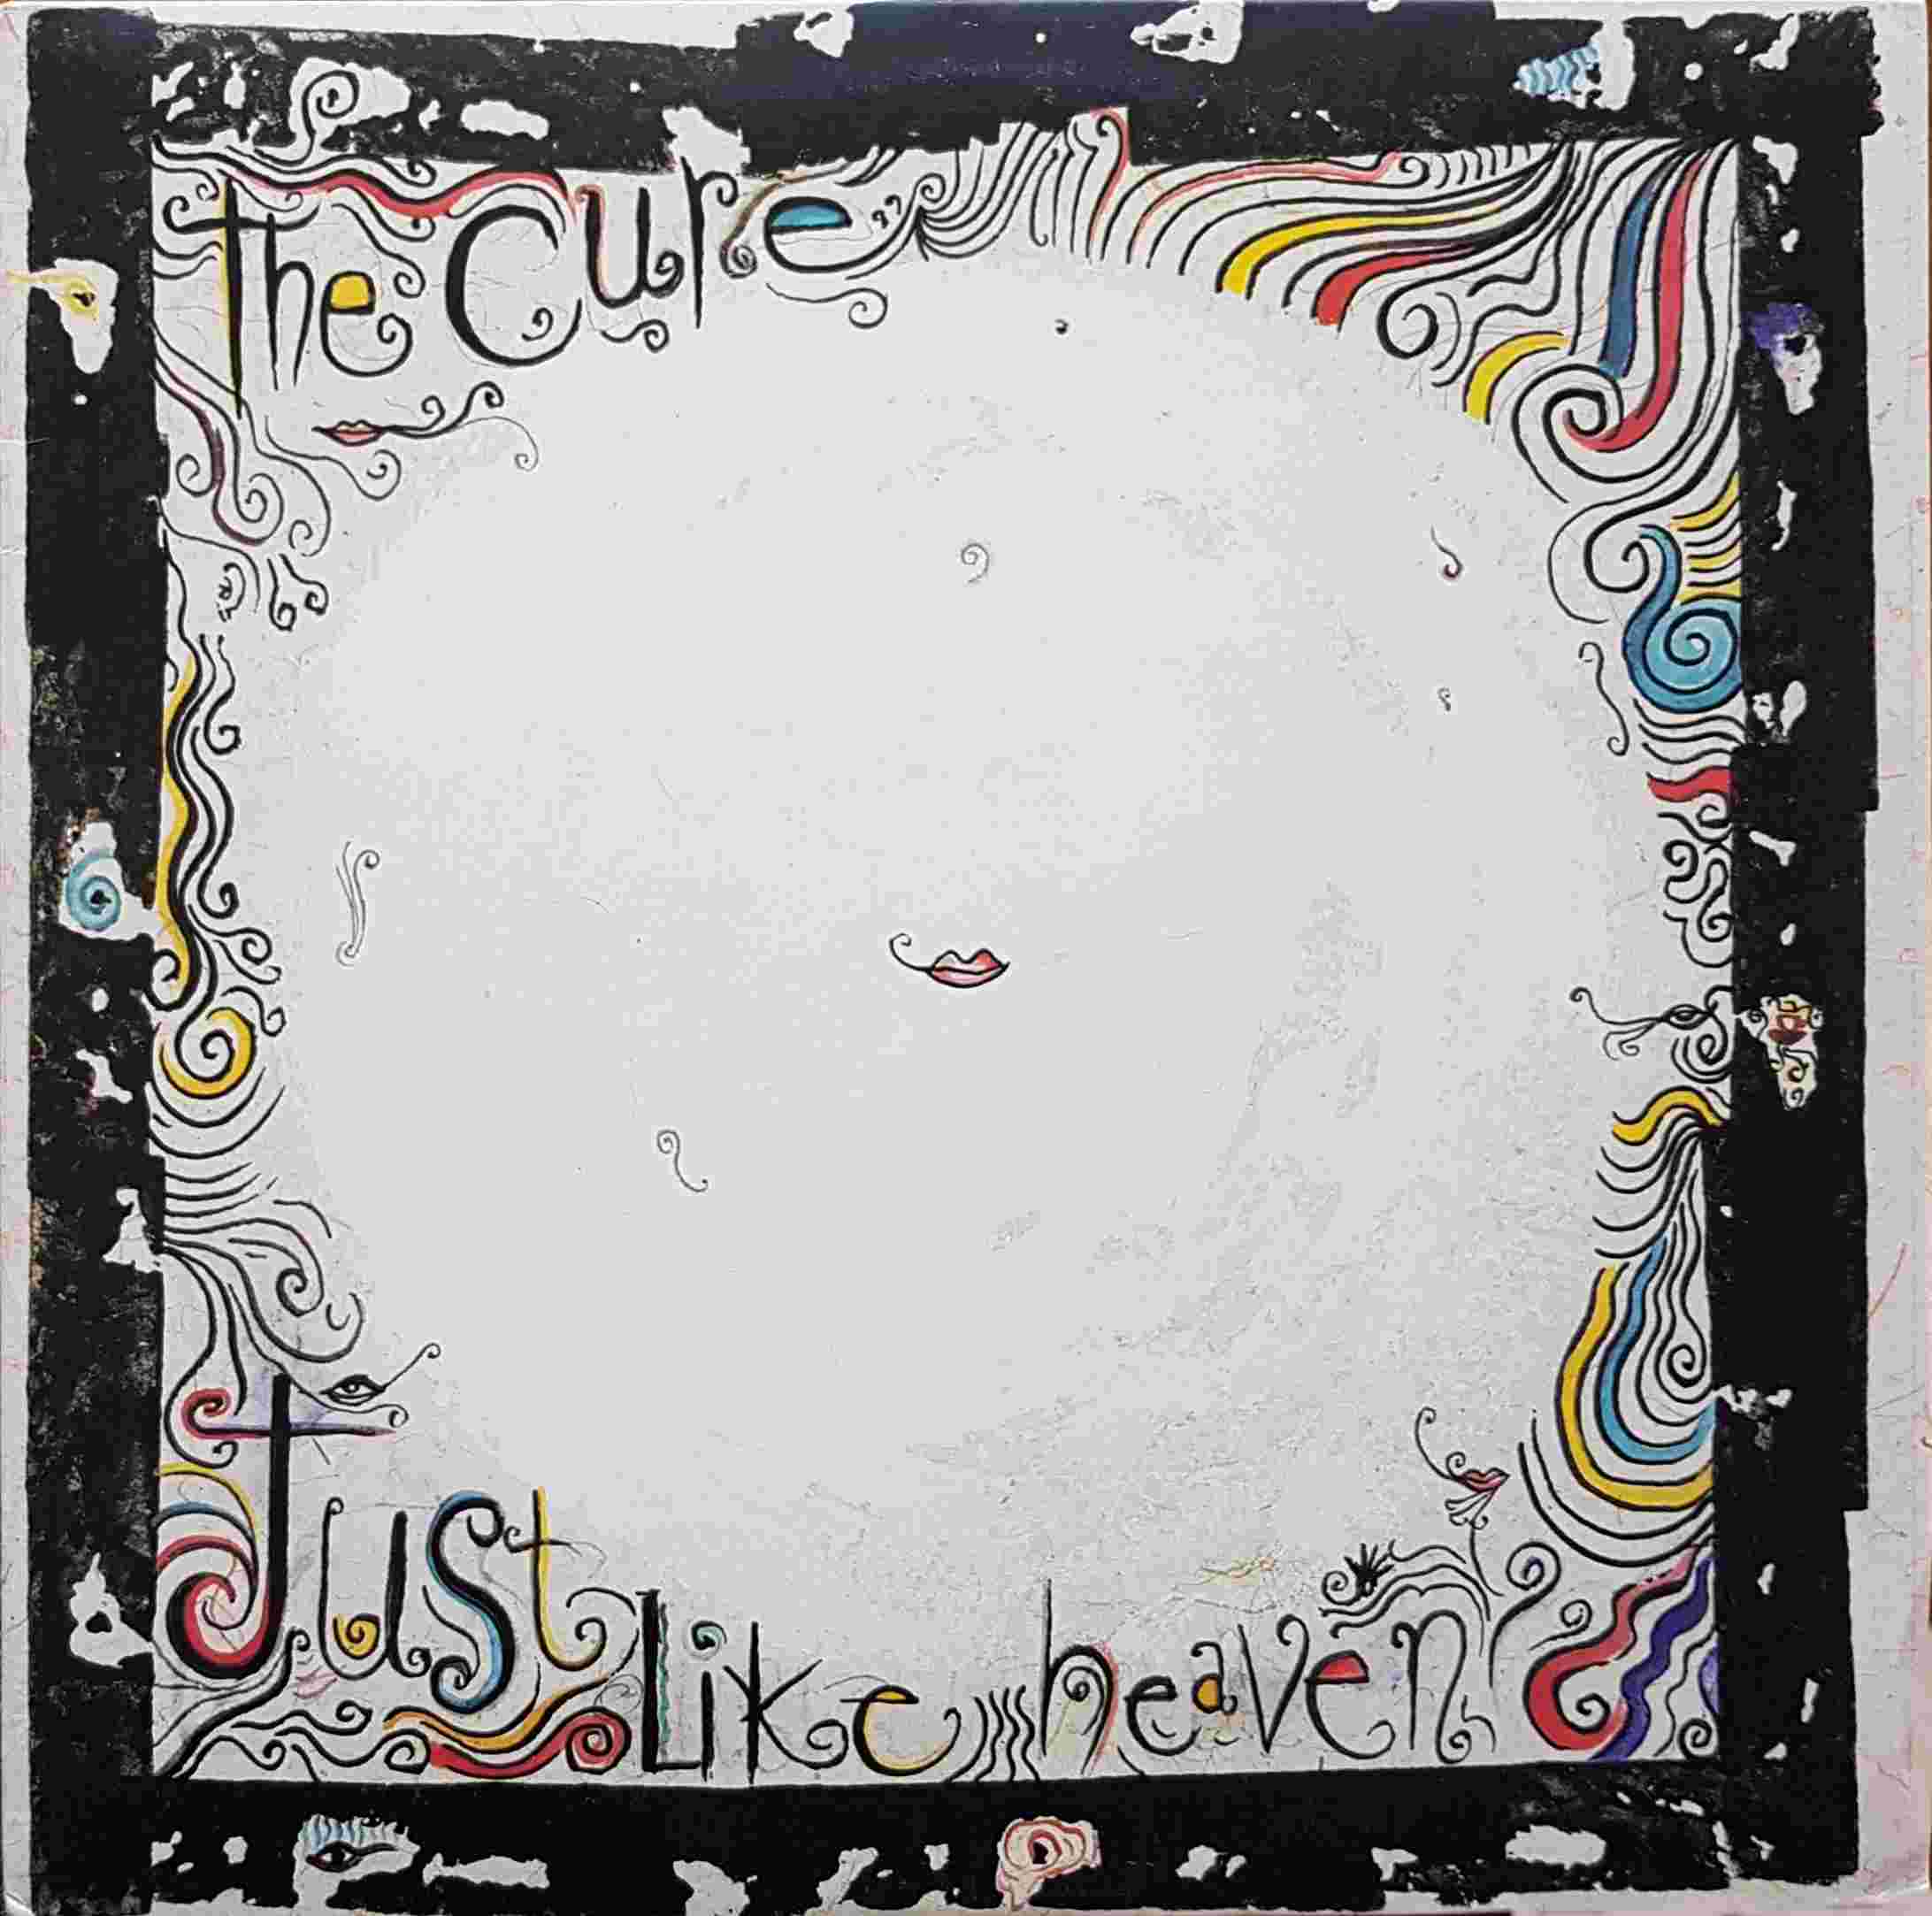 Picture of 0 - 66793 Just like Heaven - US import by artist The Cure  